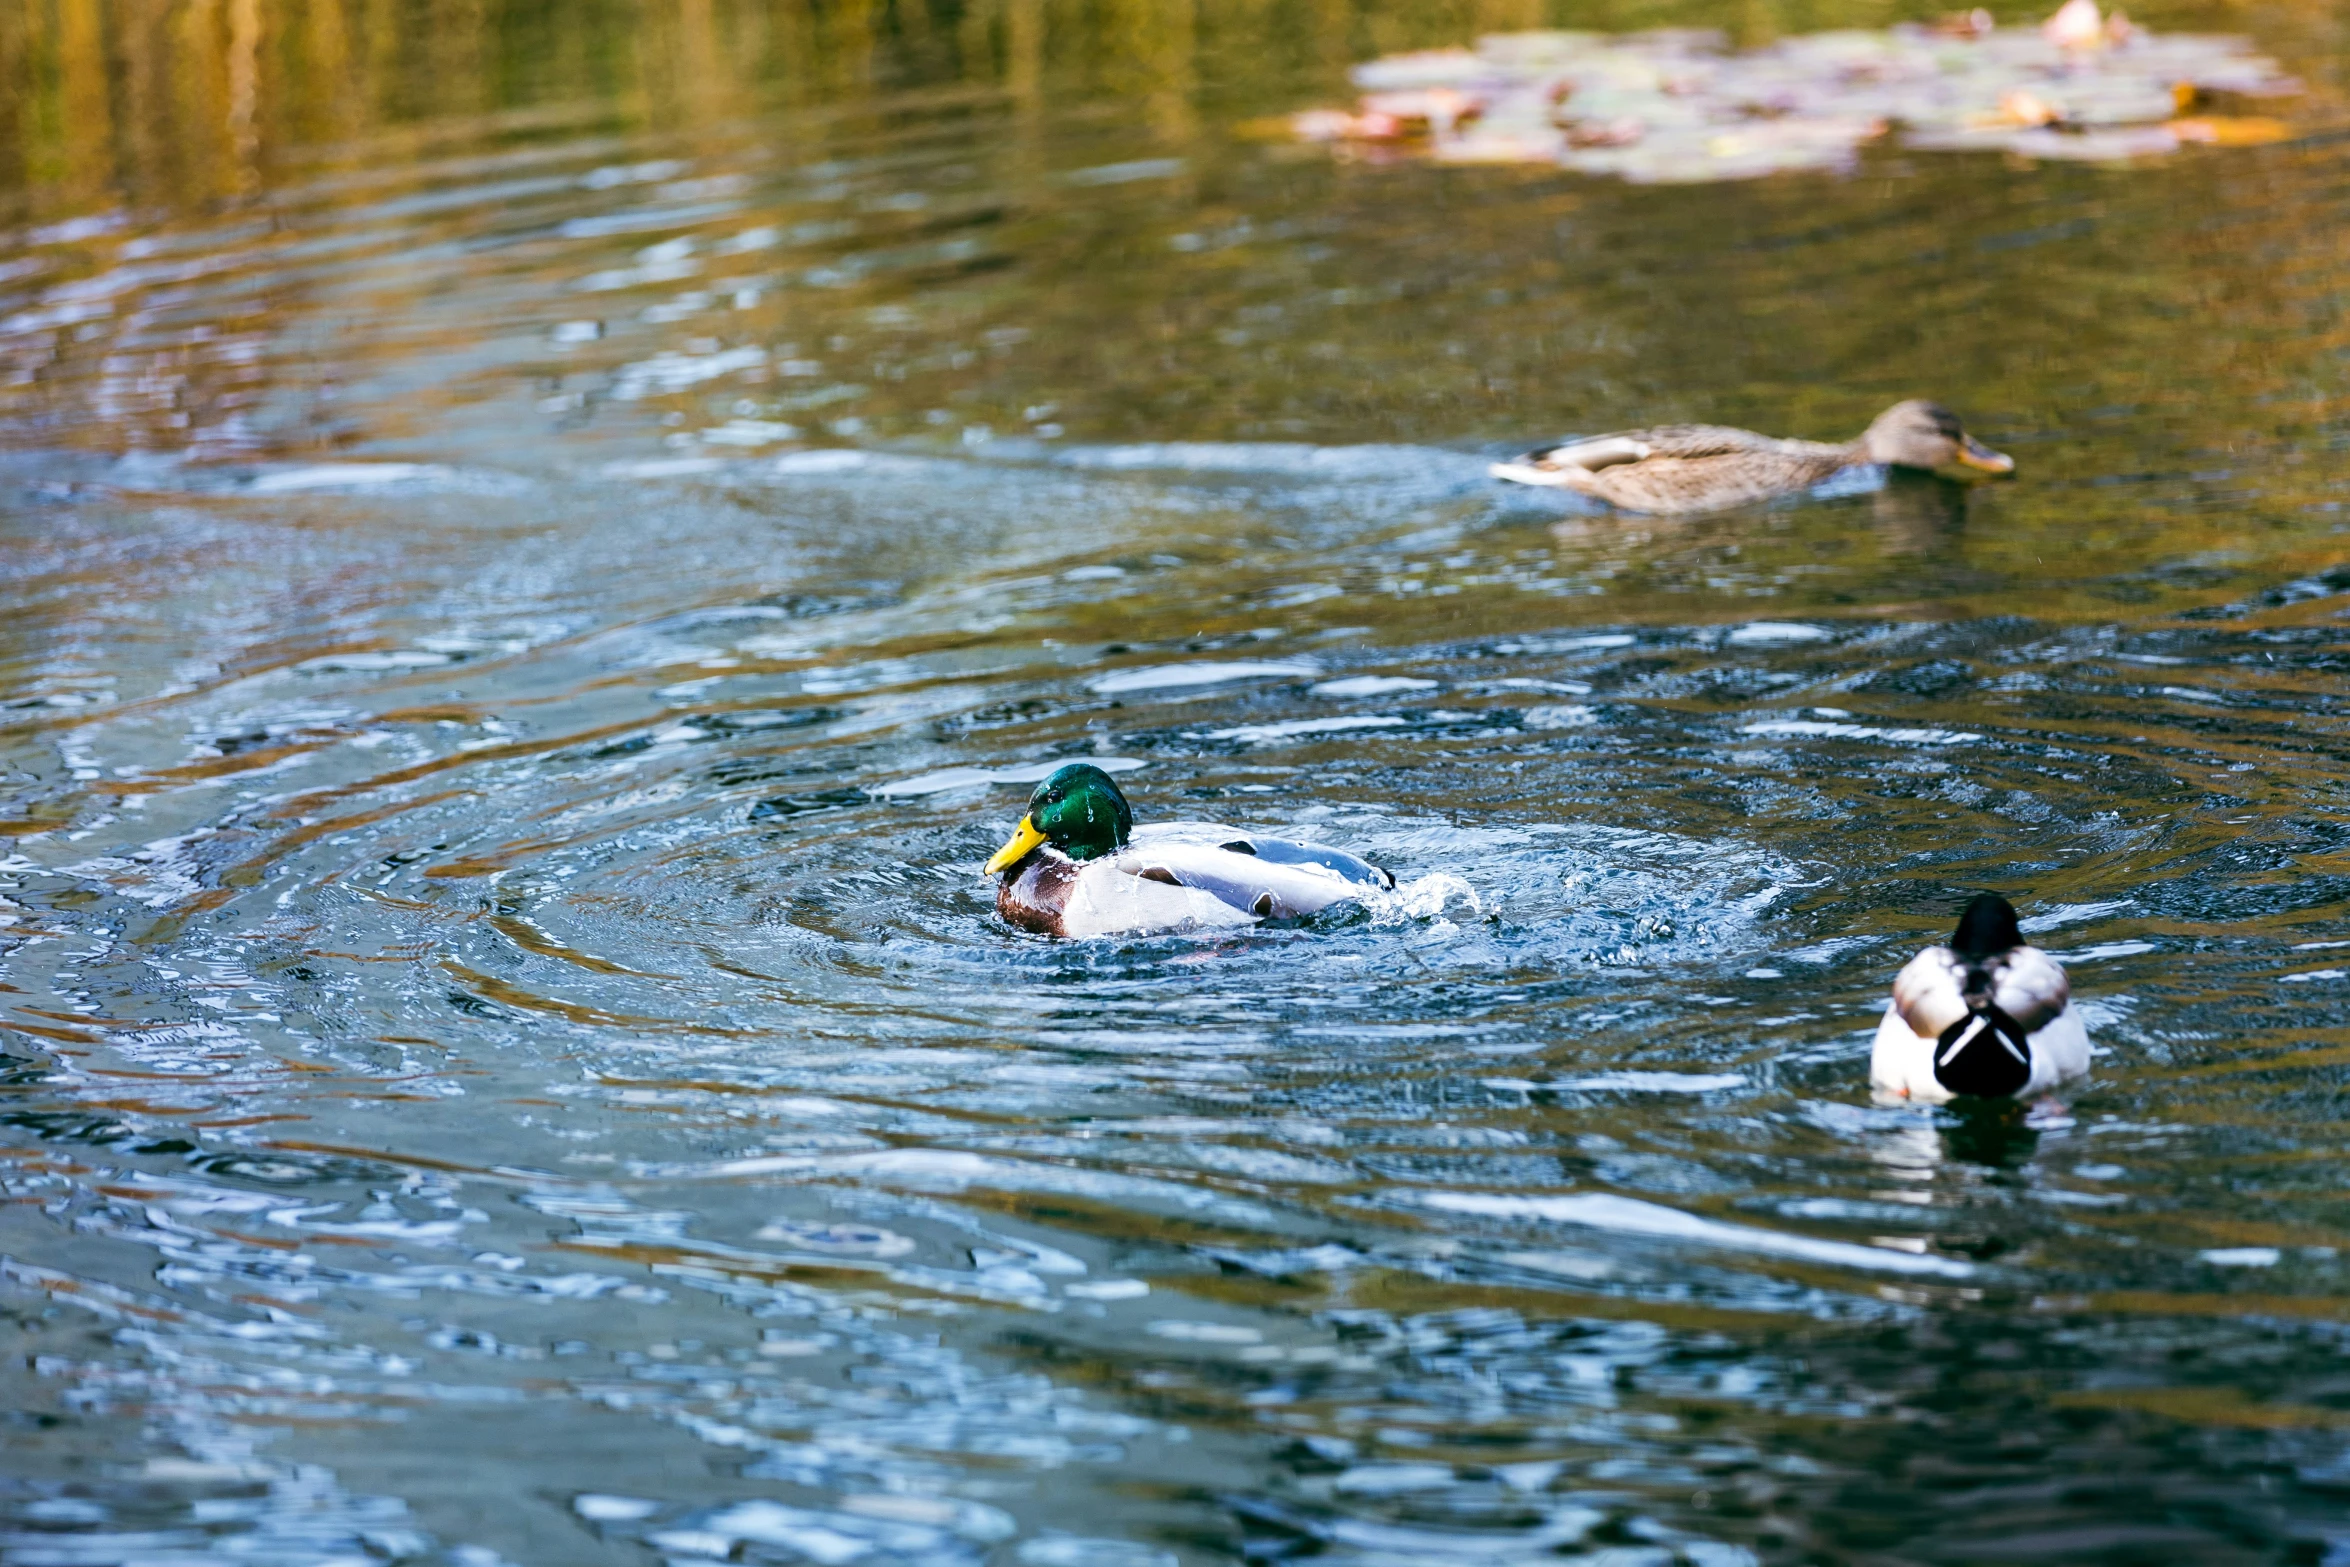 three ducks in a pond, one duck swimming